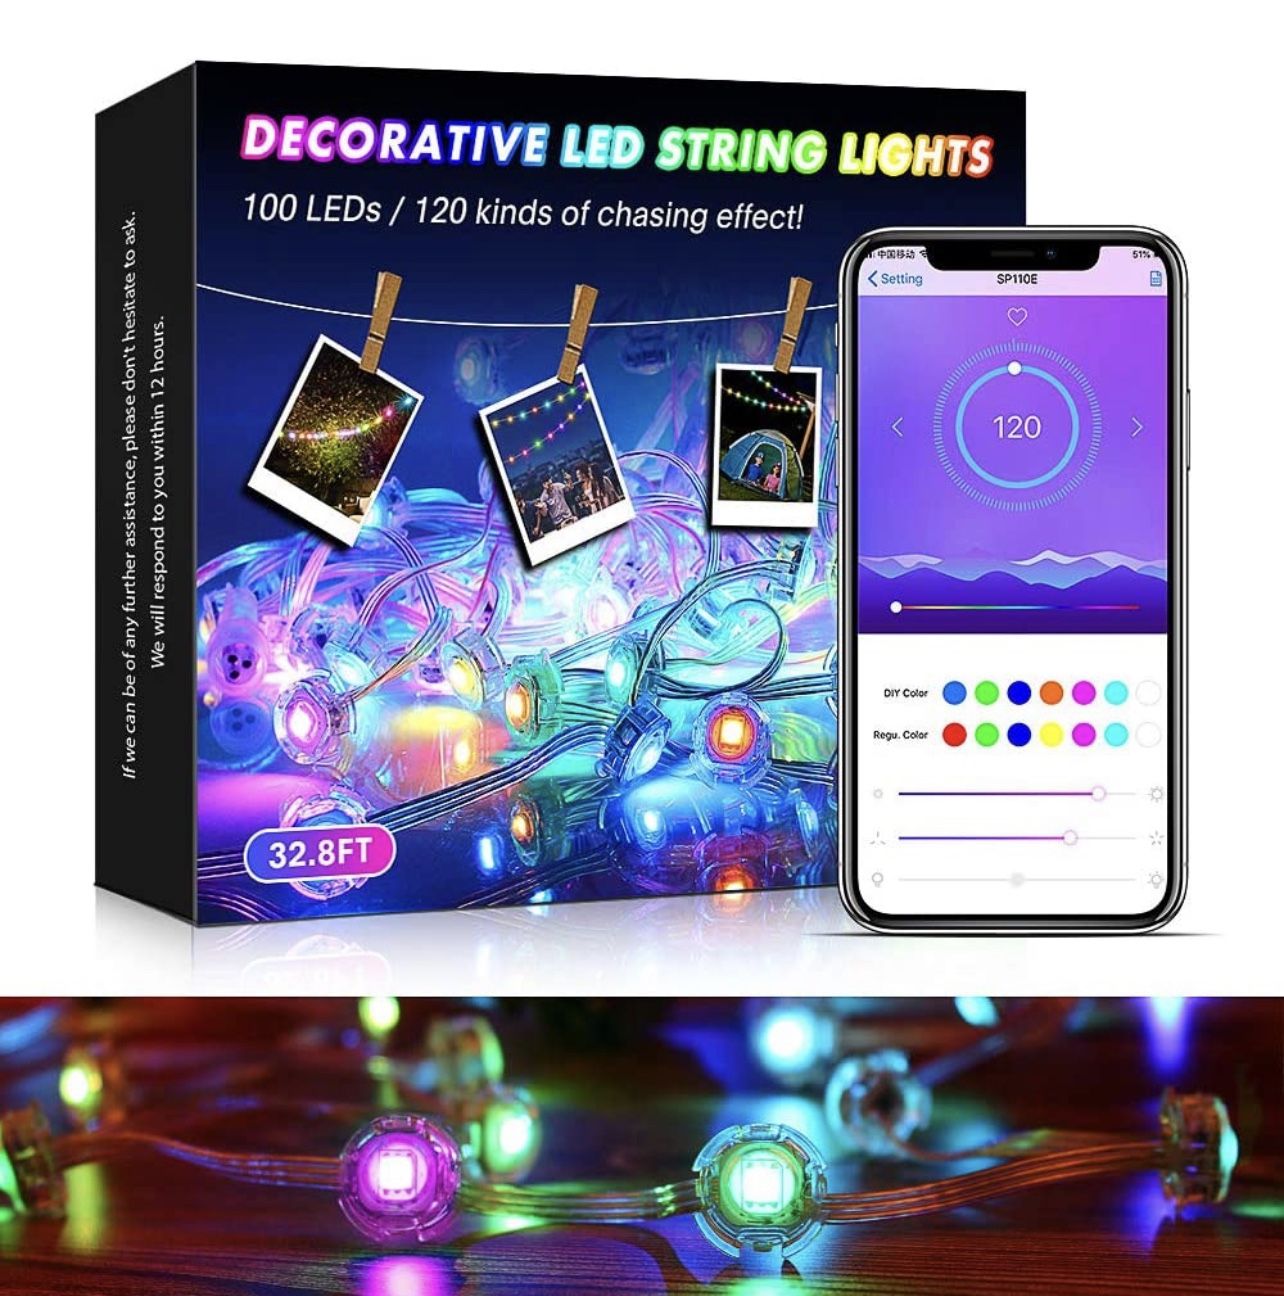 Outdoor String Lights 32.8ft 100 LEDs Dream Color String Lights with Bluetooth APP